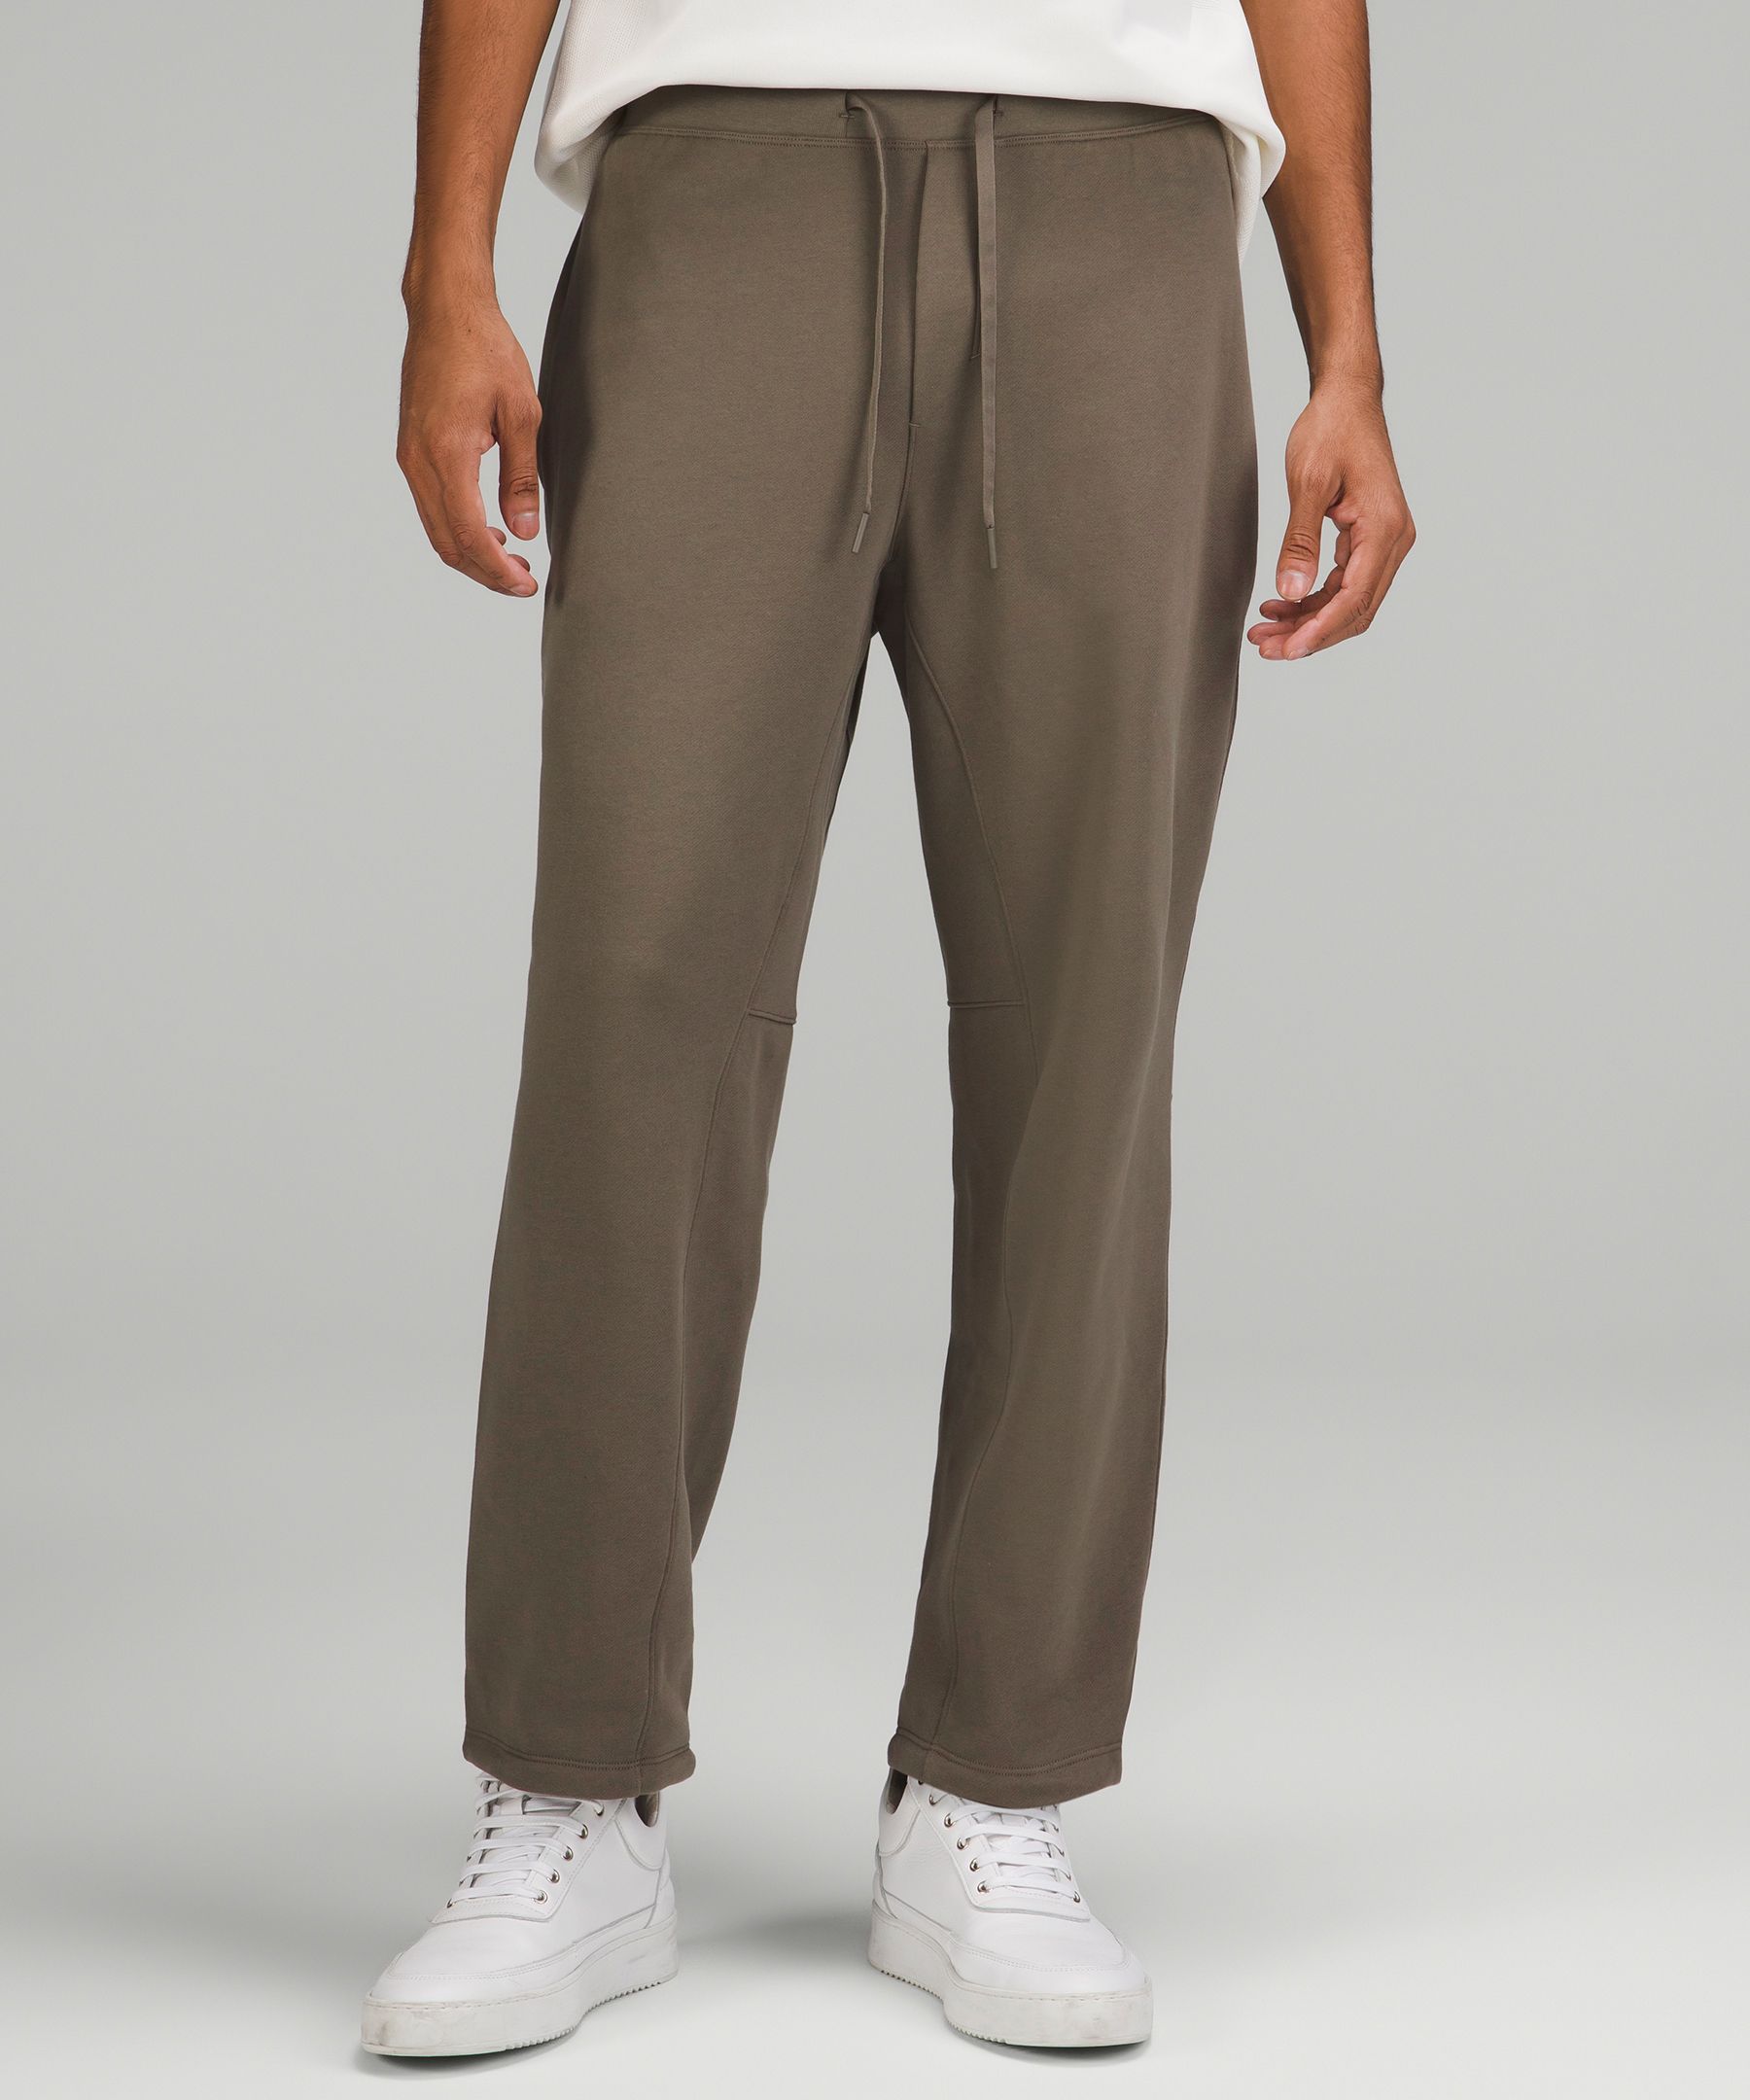 hellig Hr kilometer Relaxed-Fit French Terry Jogger | Men's Joggers | lululemon